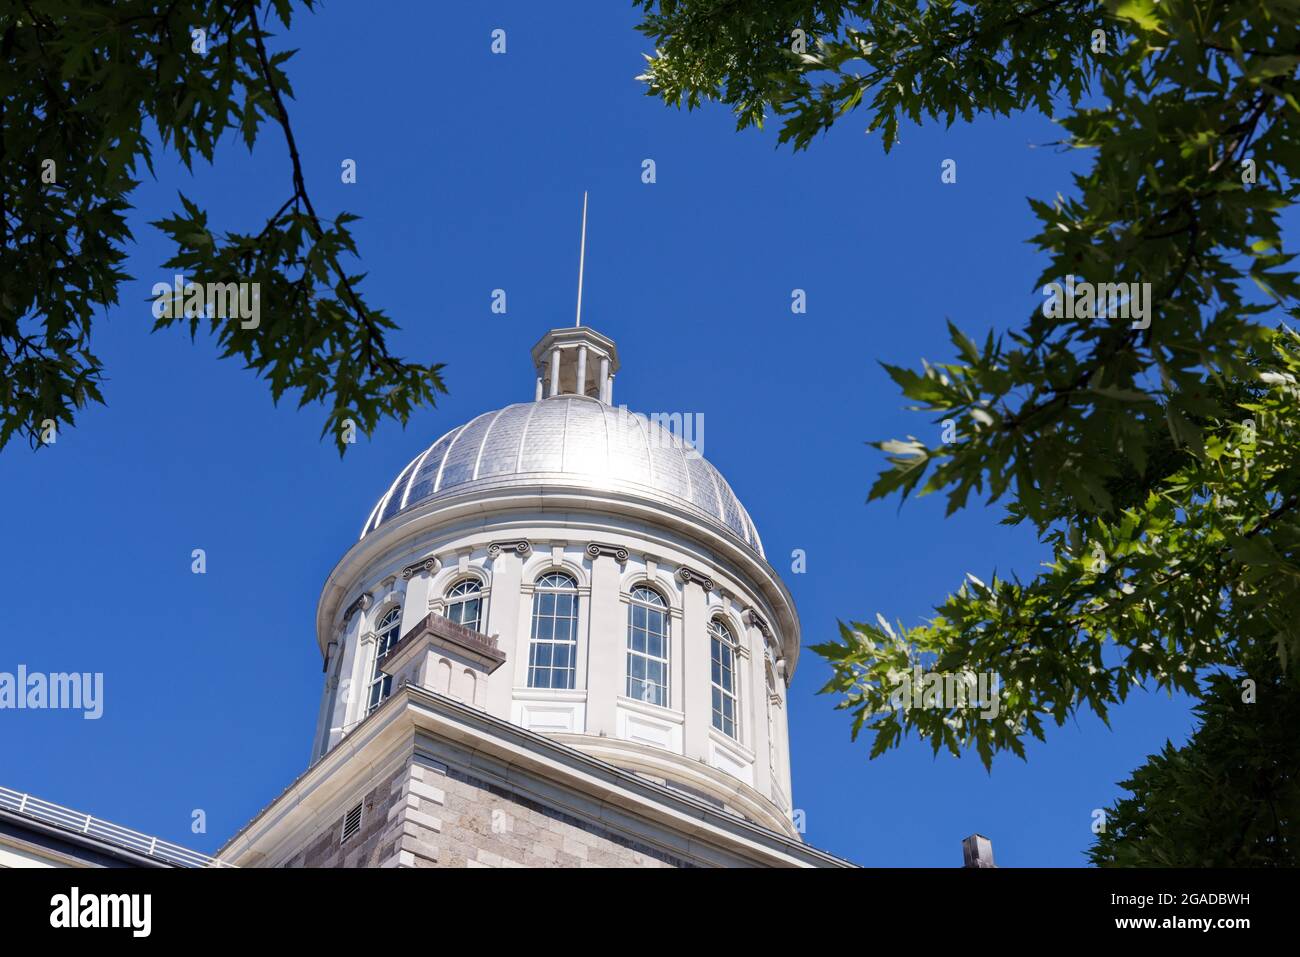 The Marché Bonsecours in Montreal's Old Port (Le Vieux Port) district Stock Photo